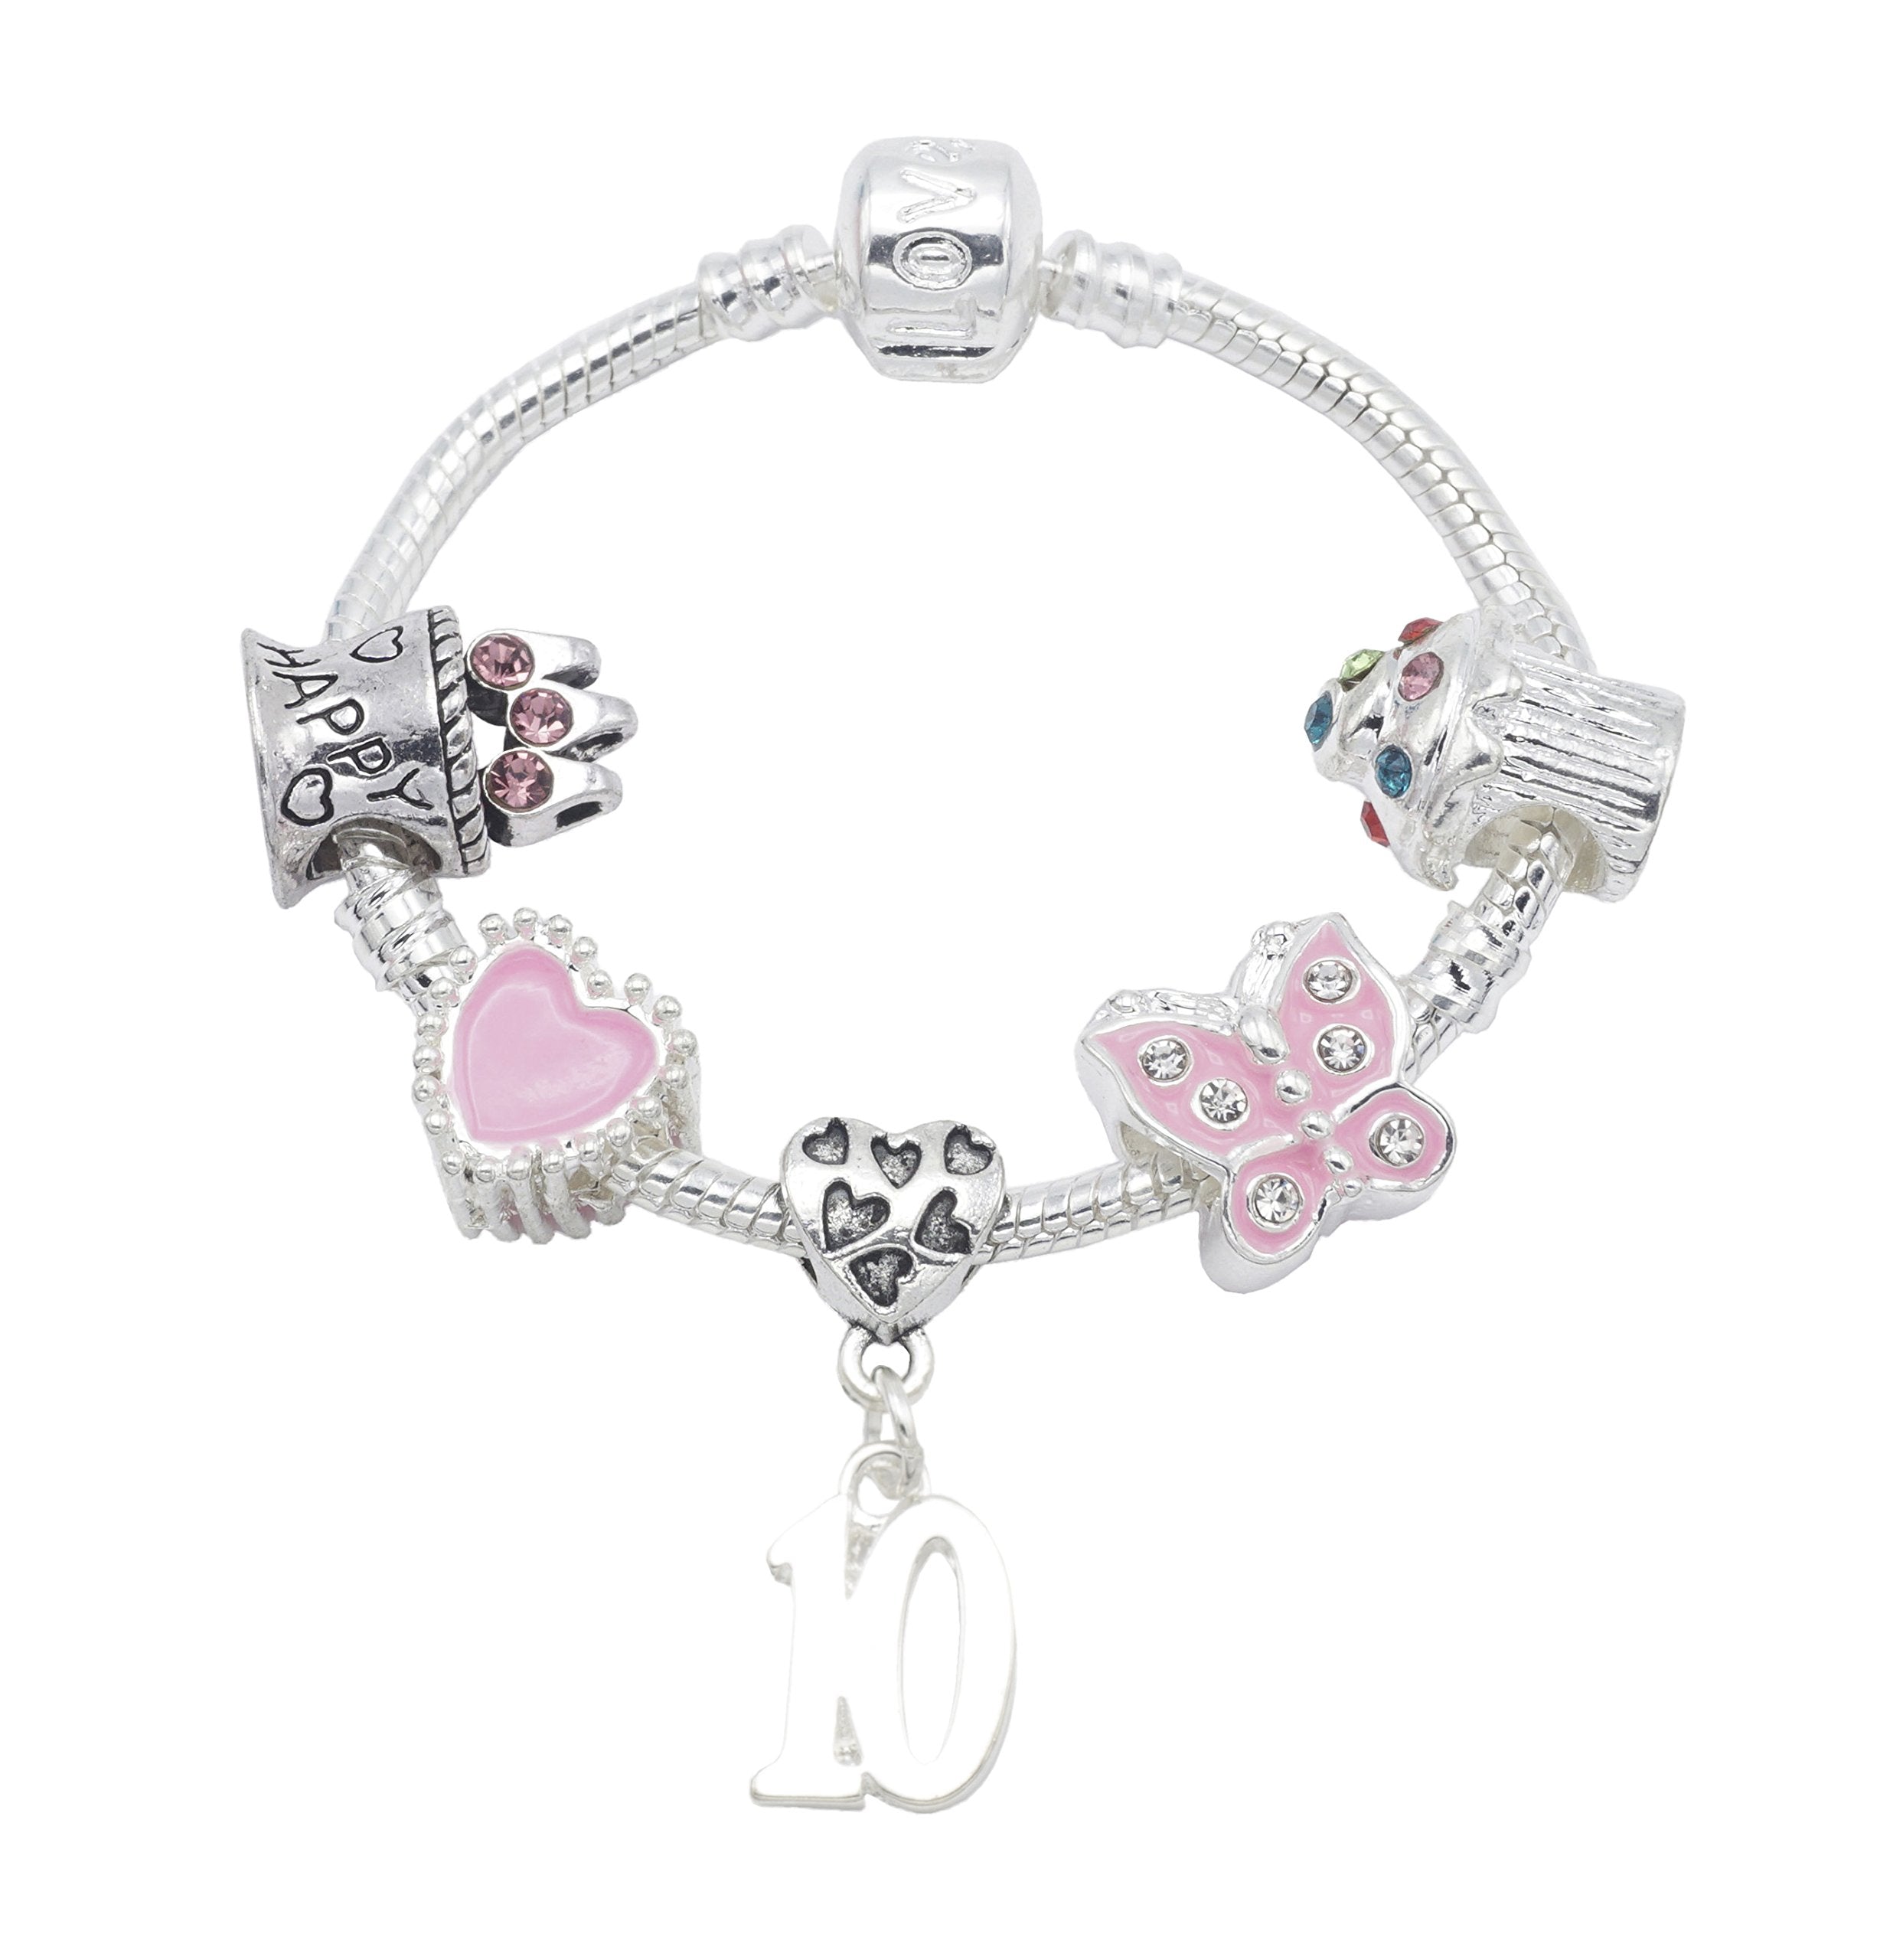 10th Birthday Silver Plated Charm Bracelet for Girls with Gift Box